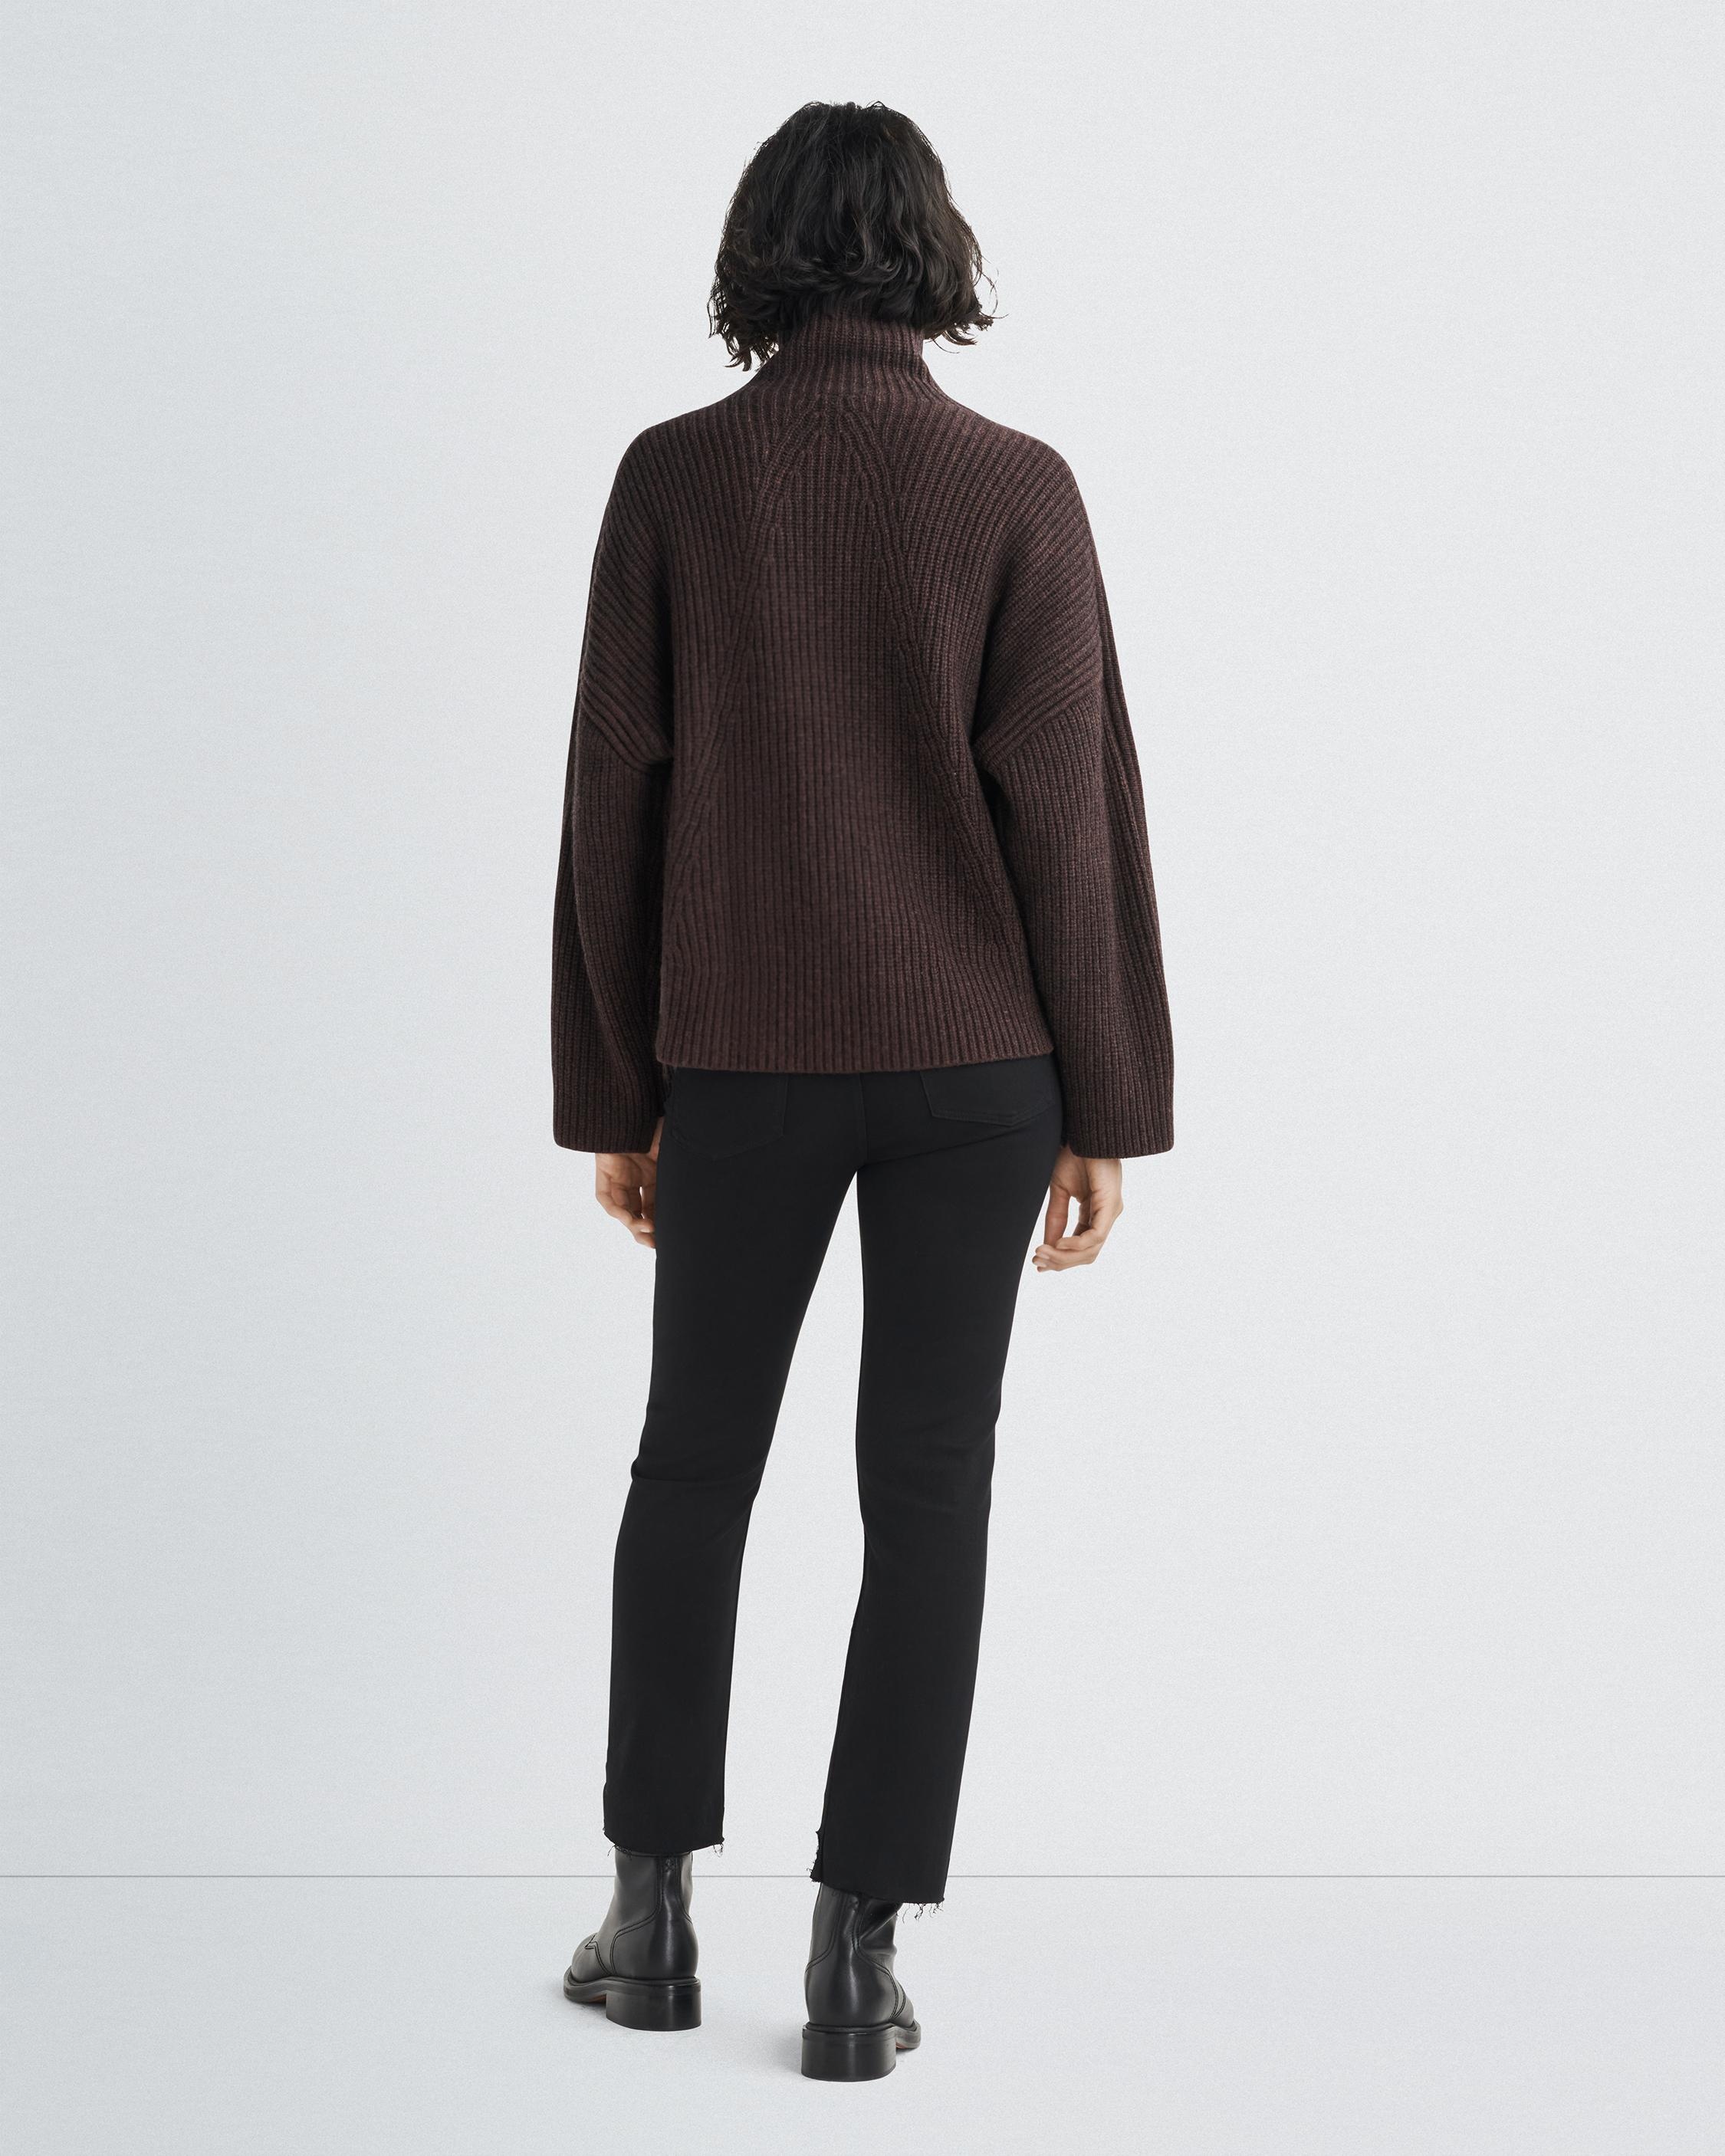 Connie Wool Turtleneck
Oversized Fit - 5